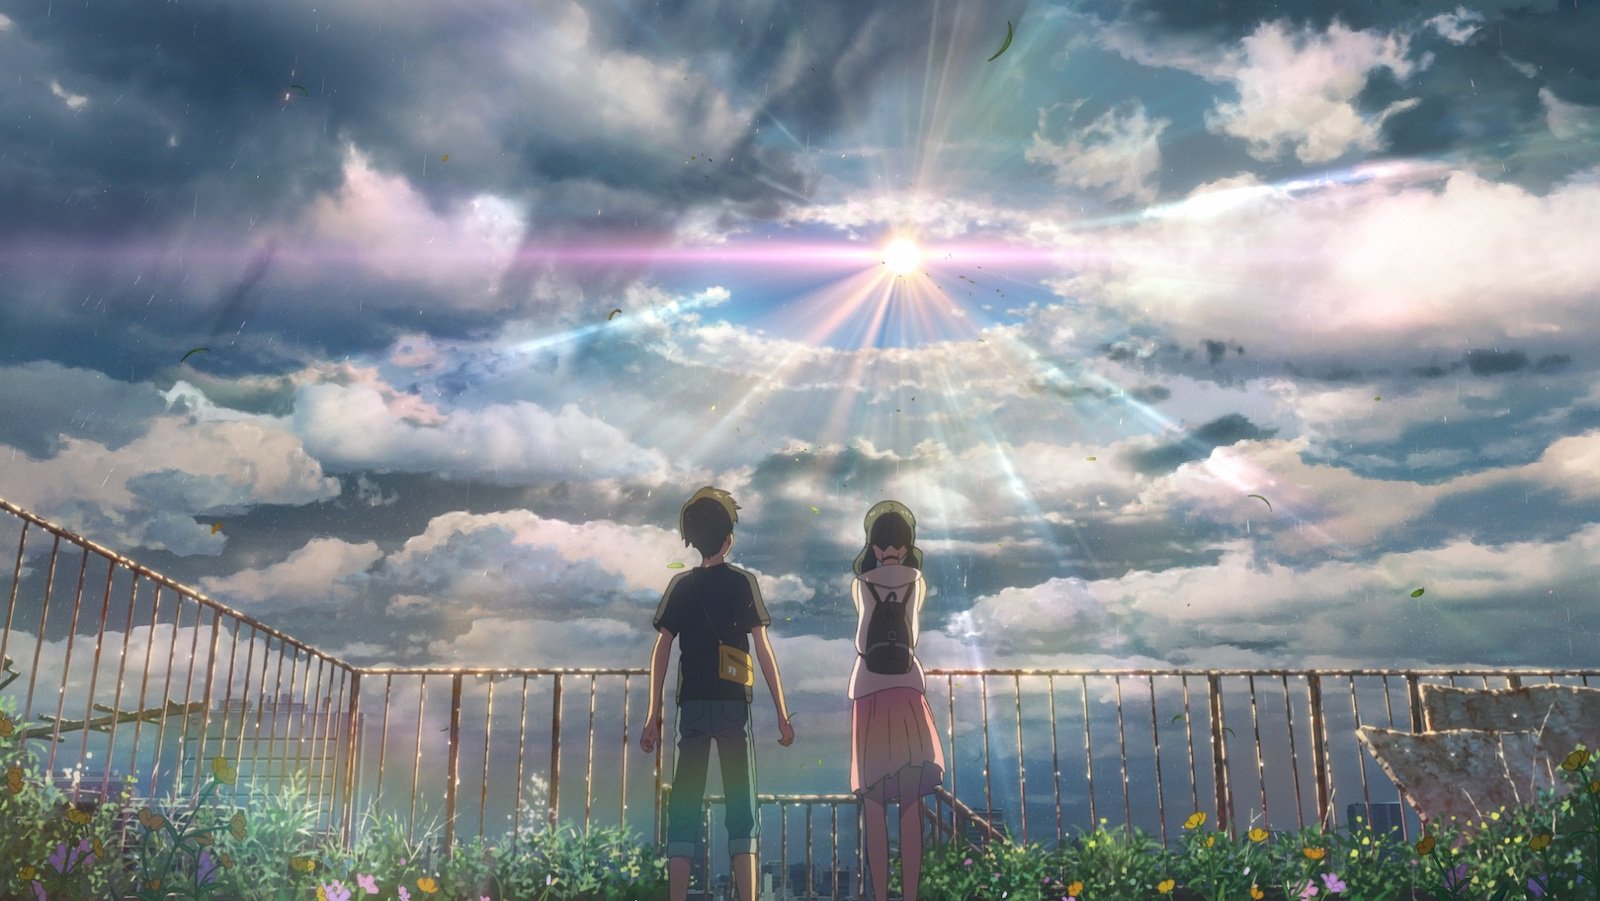 Two teenagers stand in a field and look up at a bright light breaking through clouds.